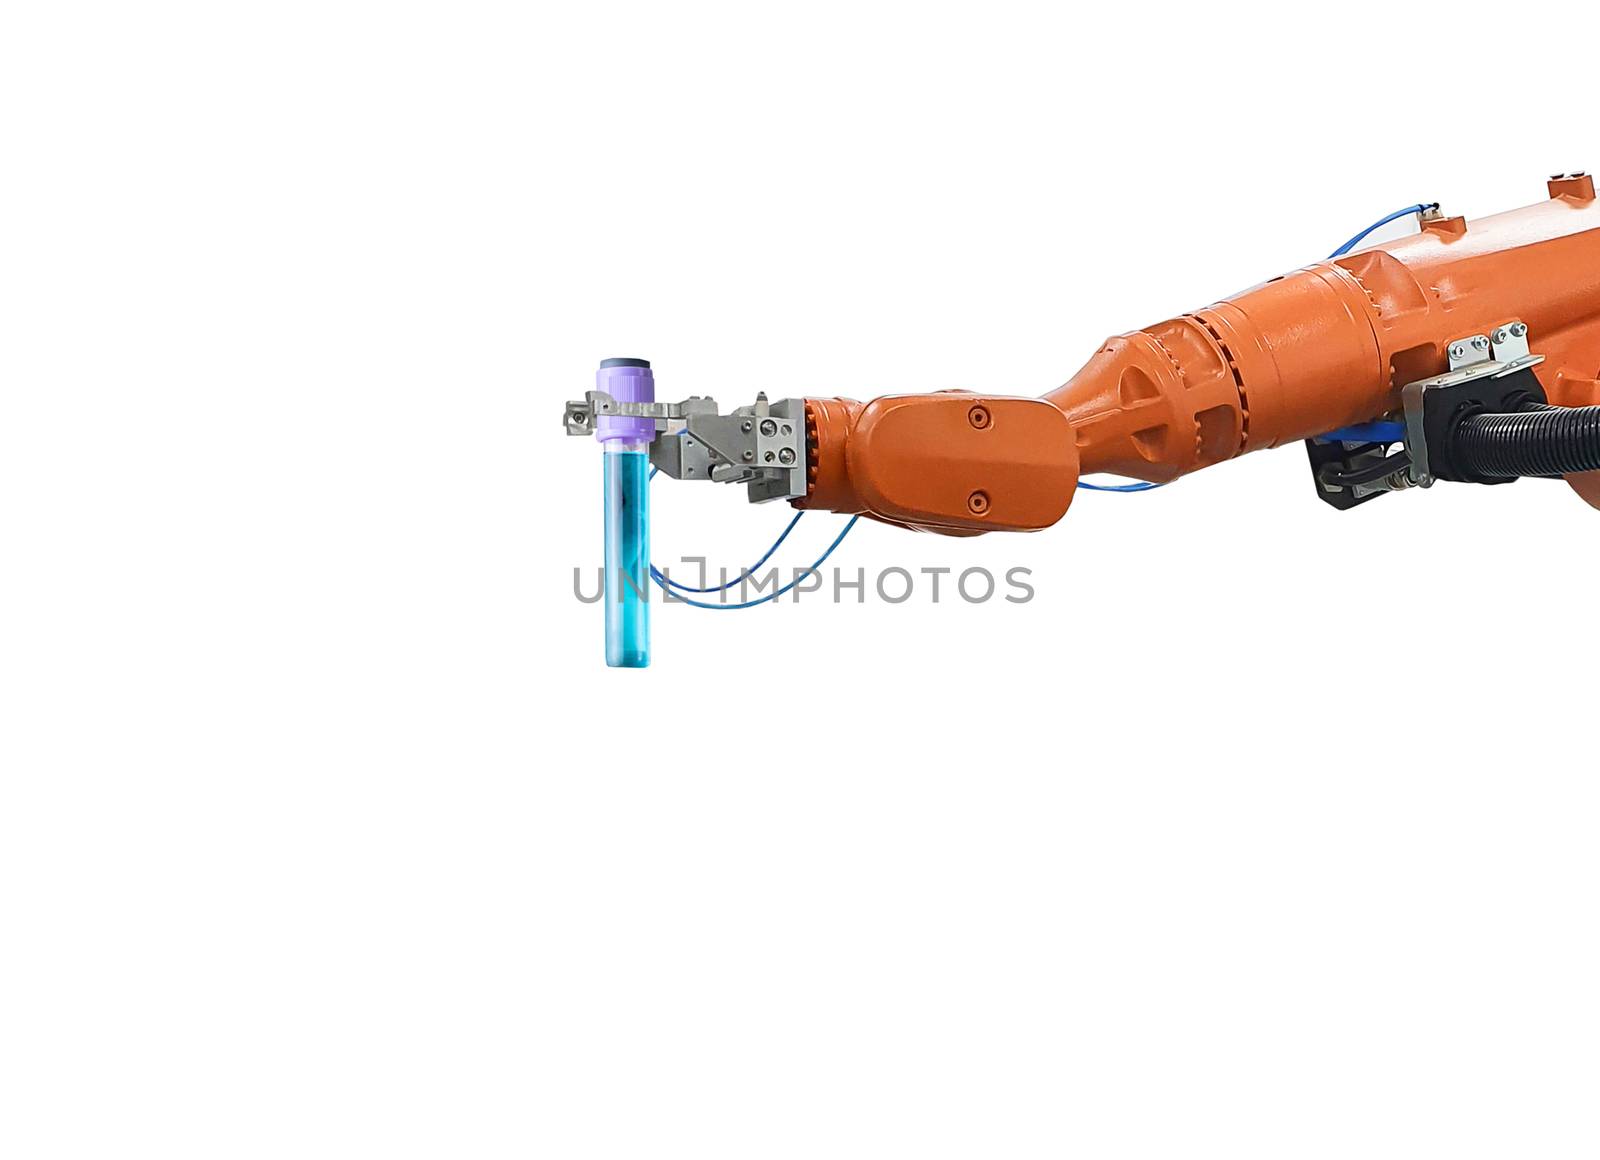 A robotic arm holding a medical test tube on a white background